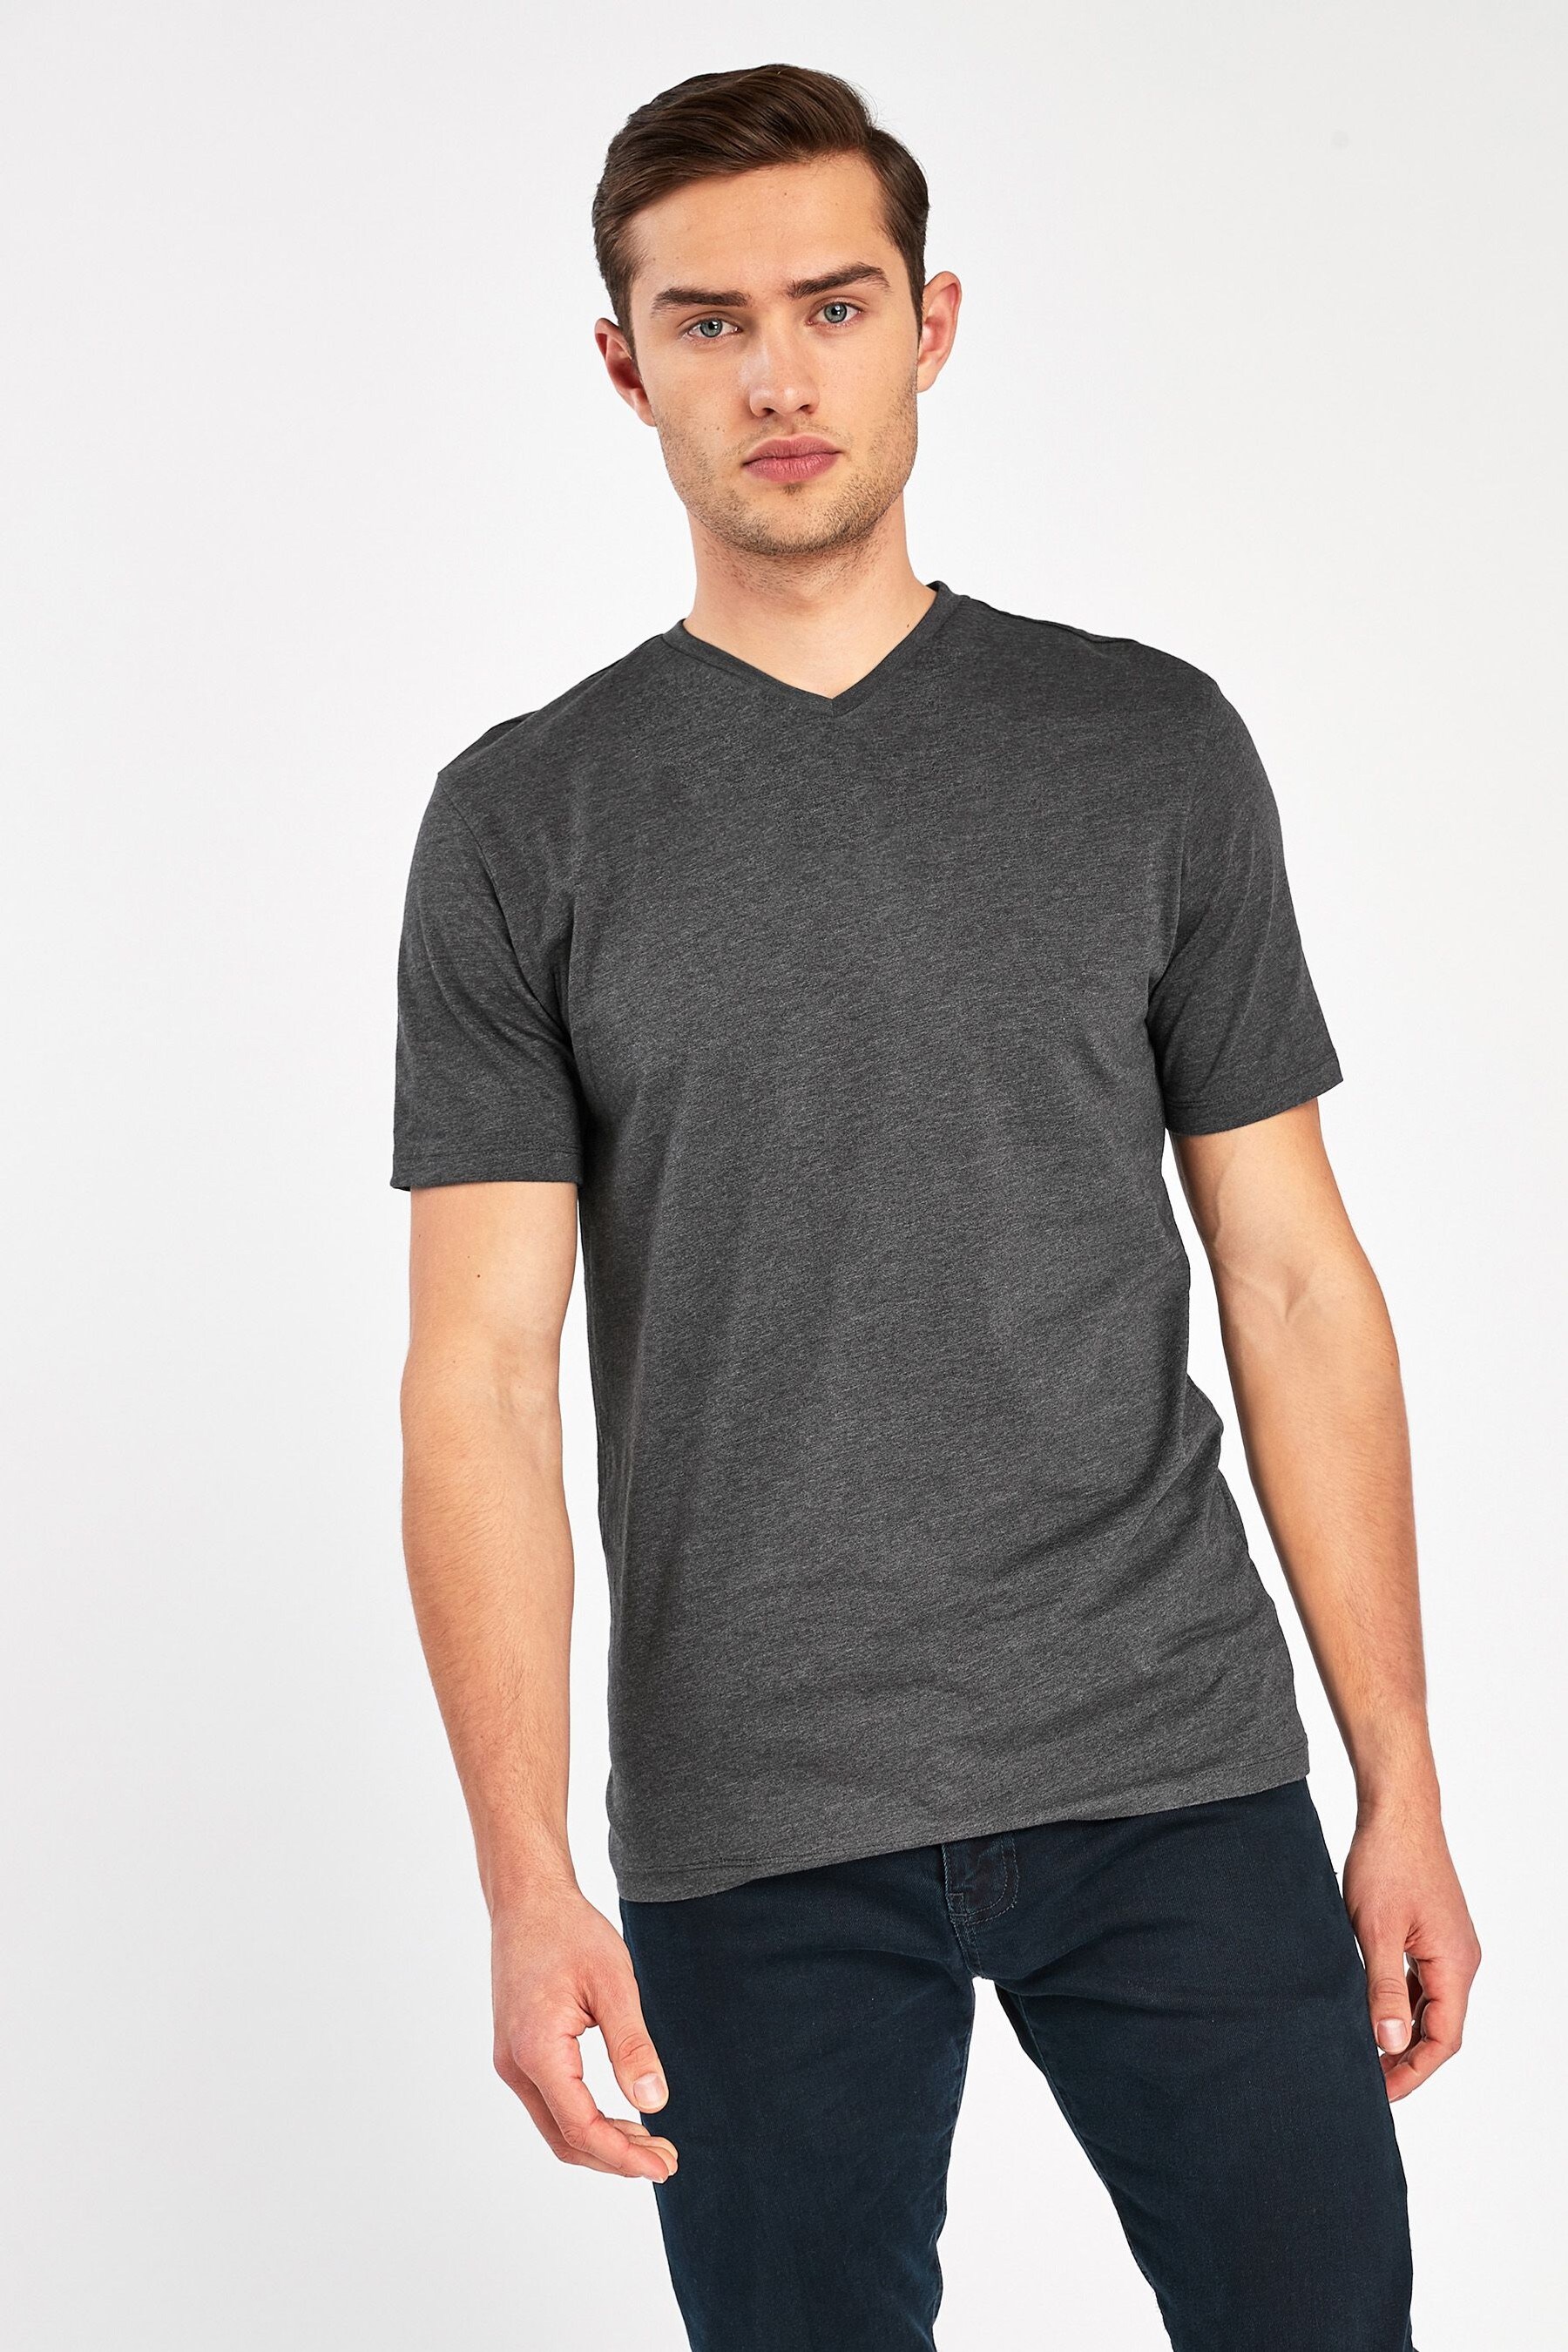 Buy Charcoal Grey Marl Slim Essential V-Neck T-Shirt from the Next UK ...